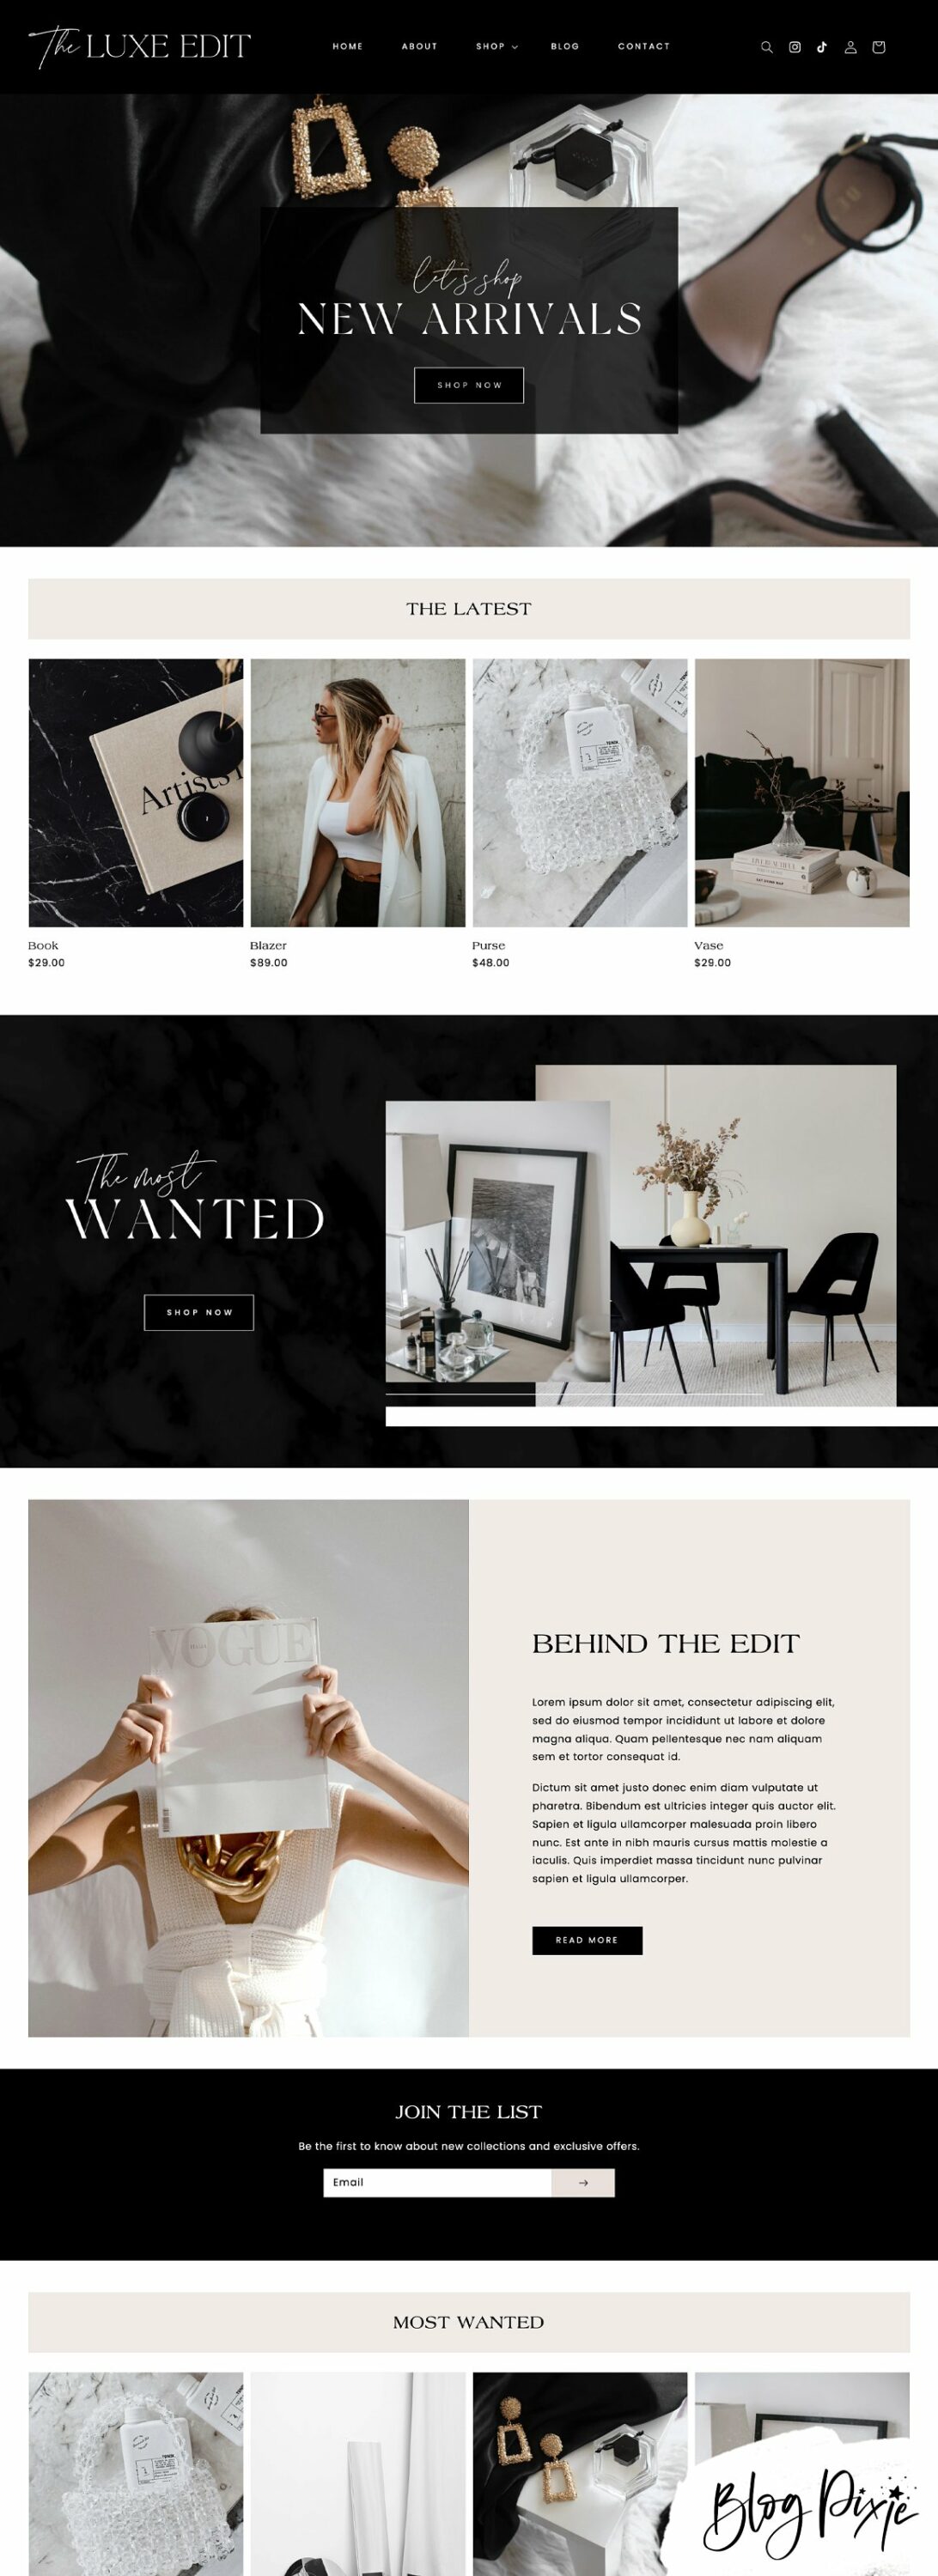 Page image of exquisite Shopify theme.